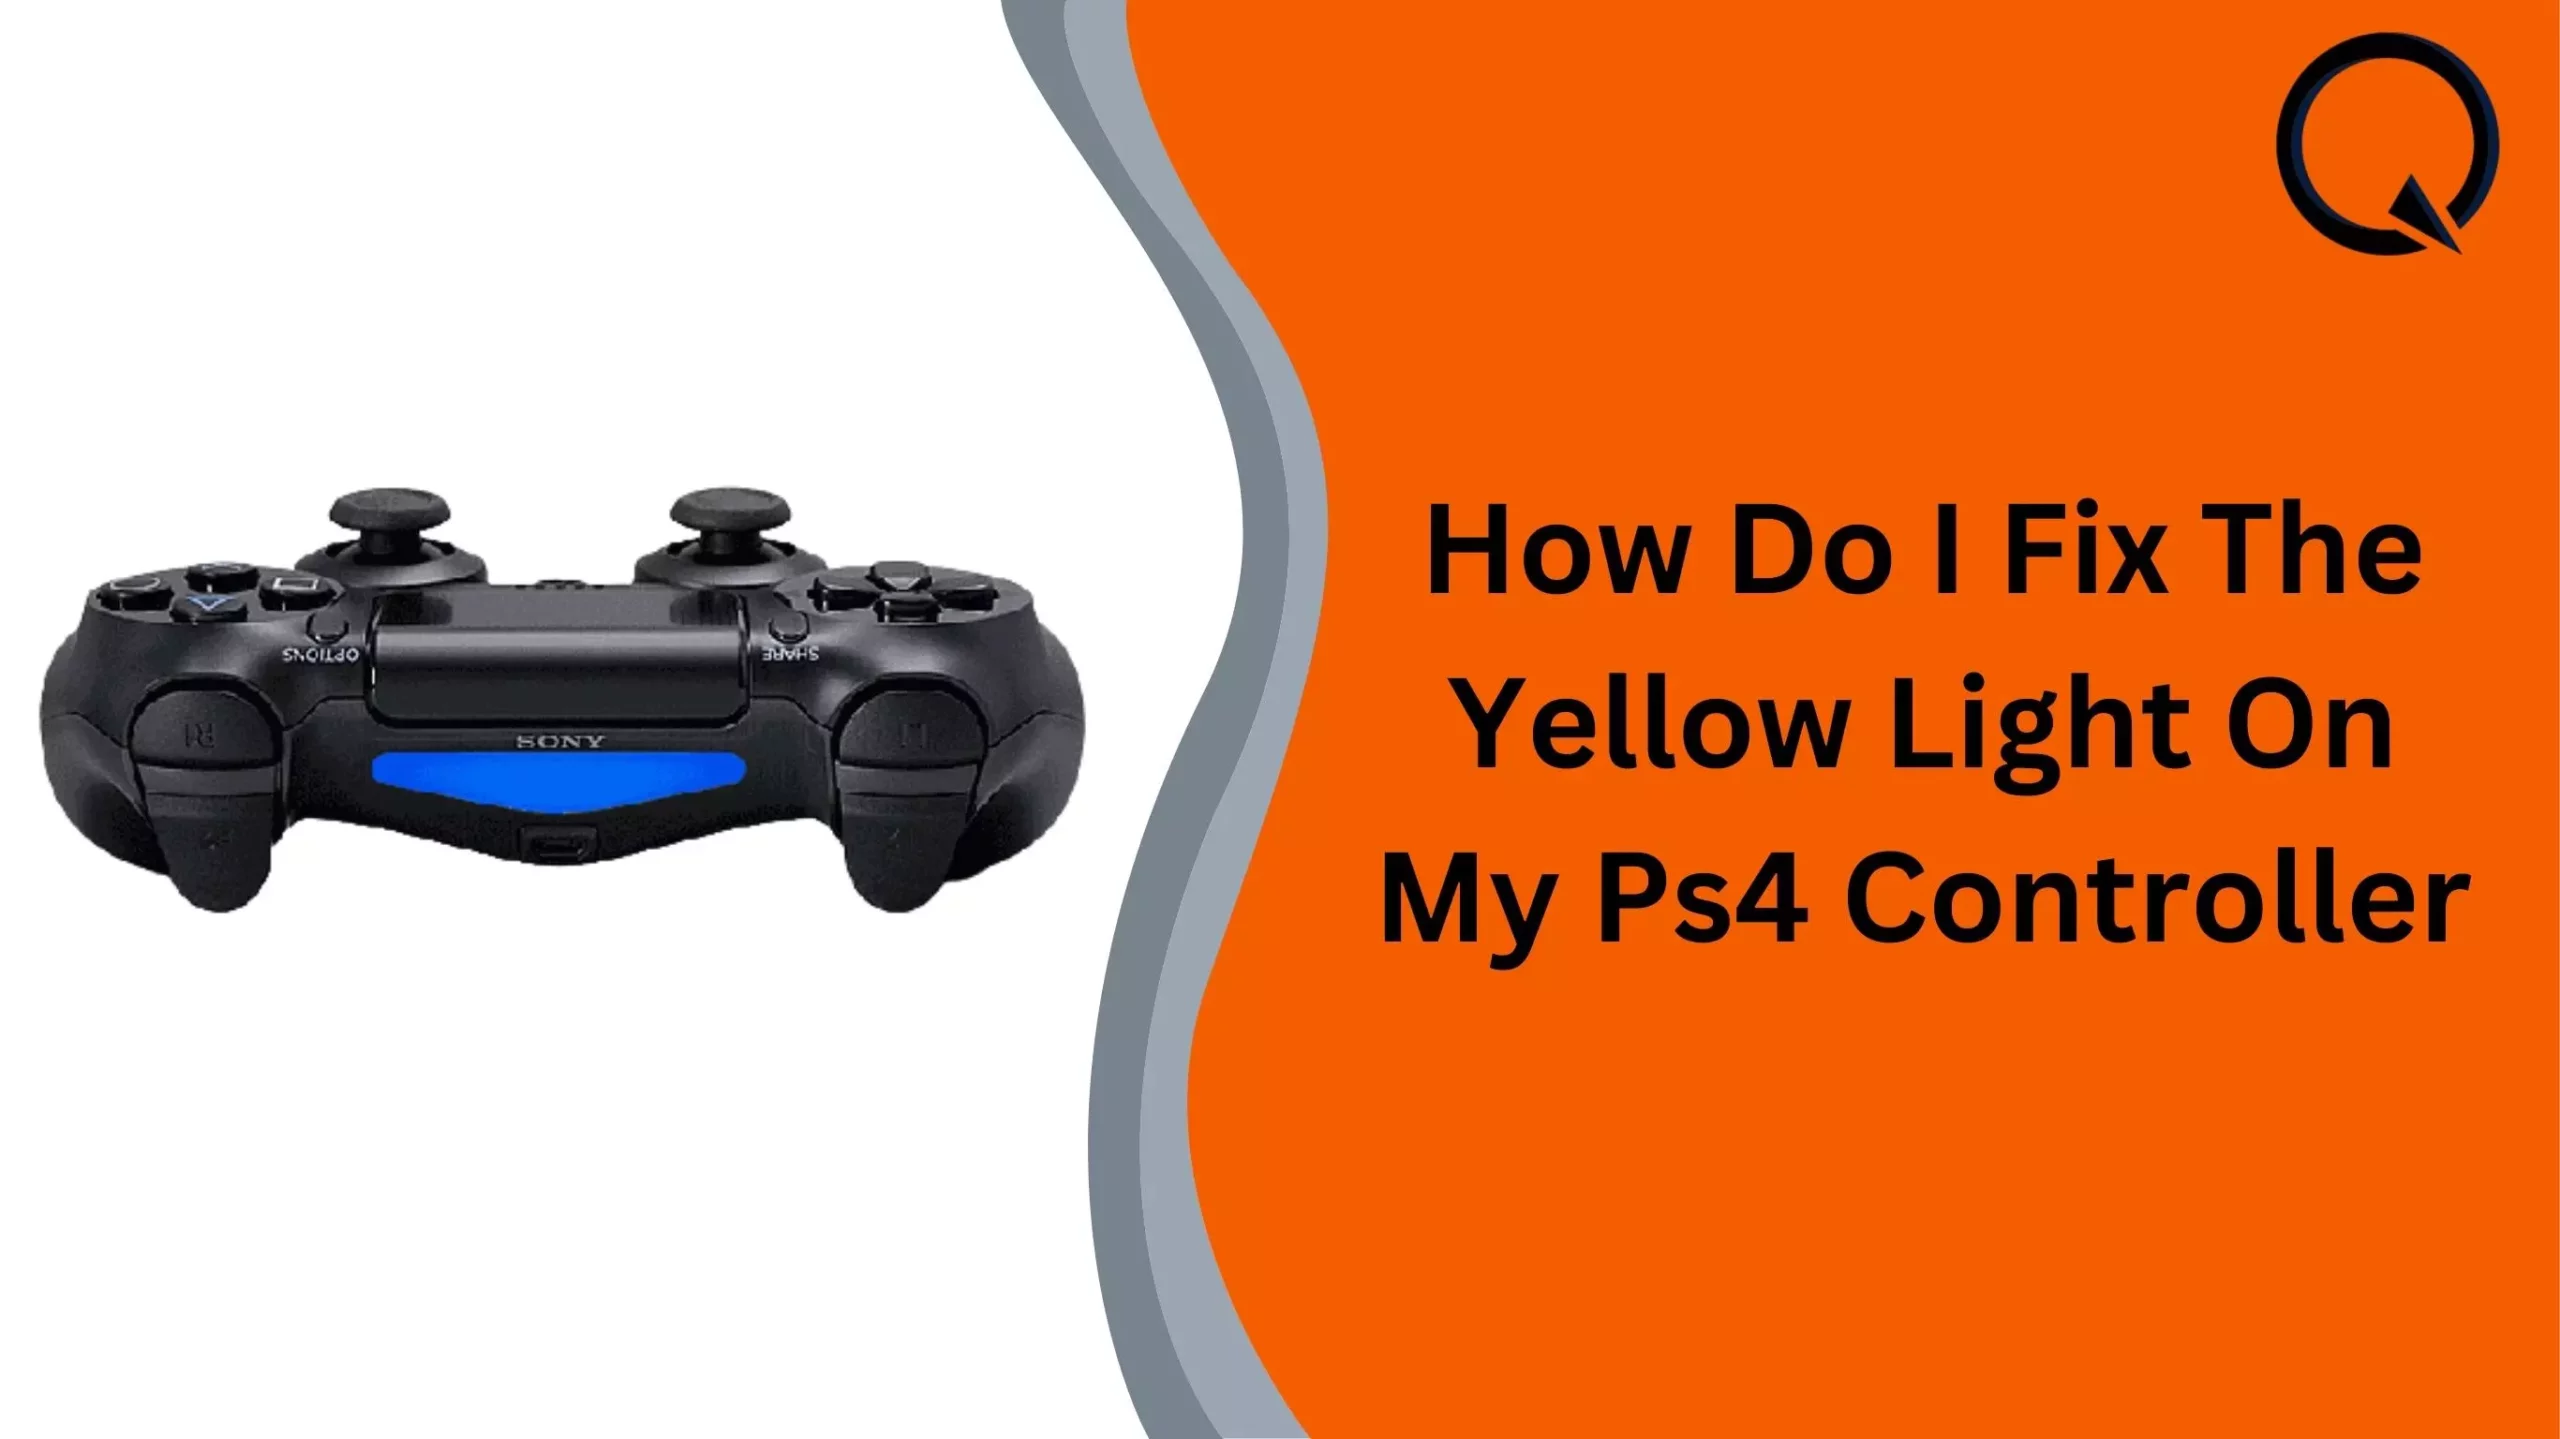 How Do I Fix The Yellow Light On My Ps4 Controller